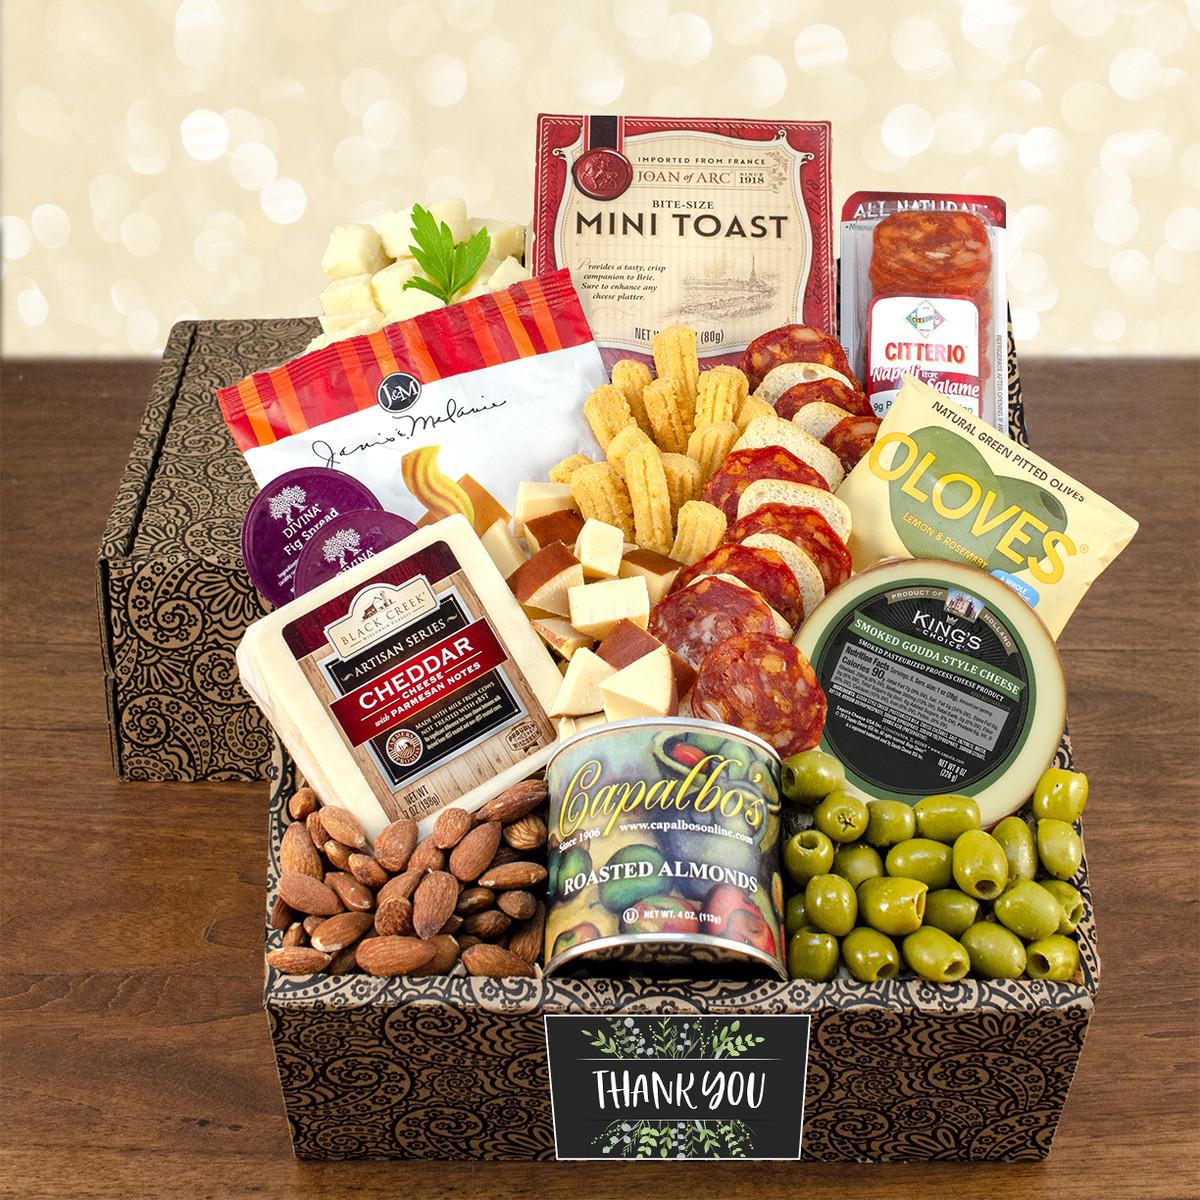 Capalbos Cheese and Crackers Classic Collection Gift Box - Thank You